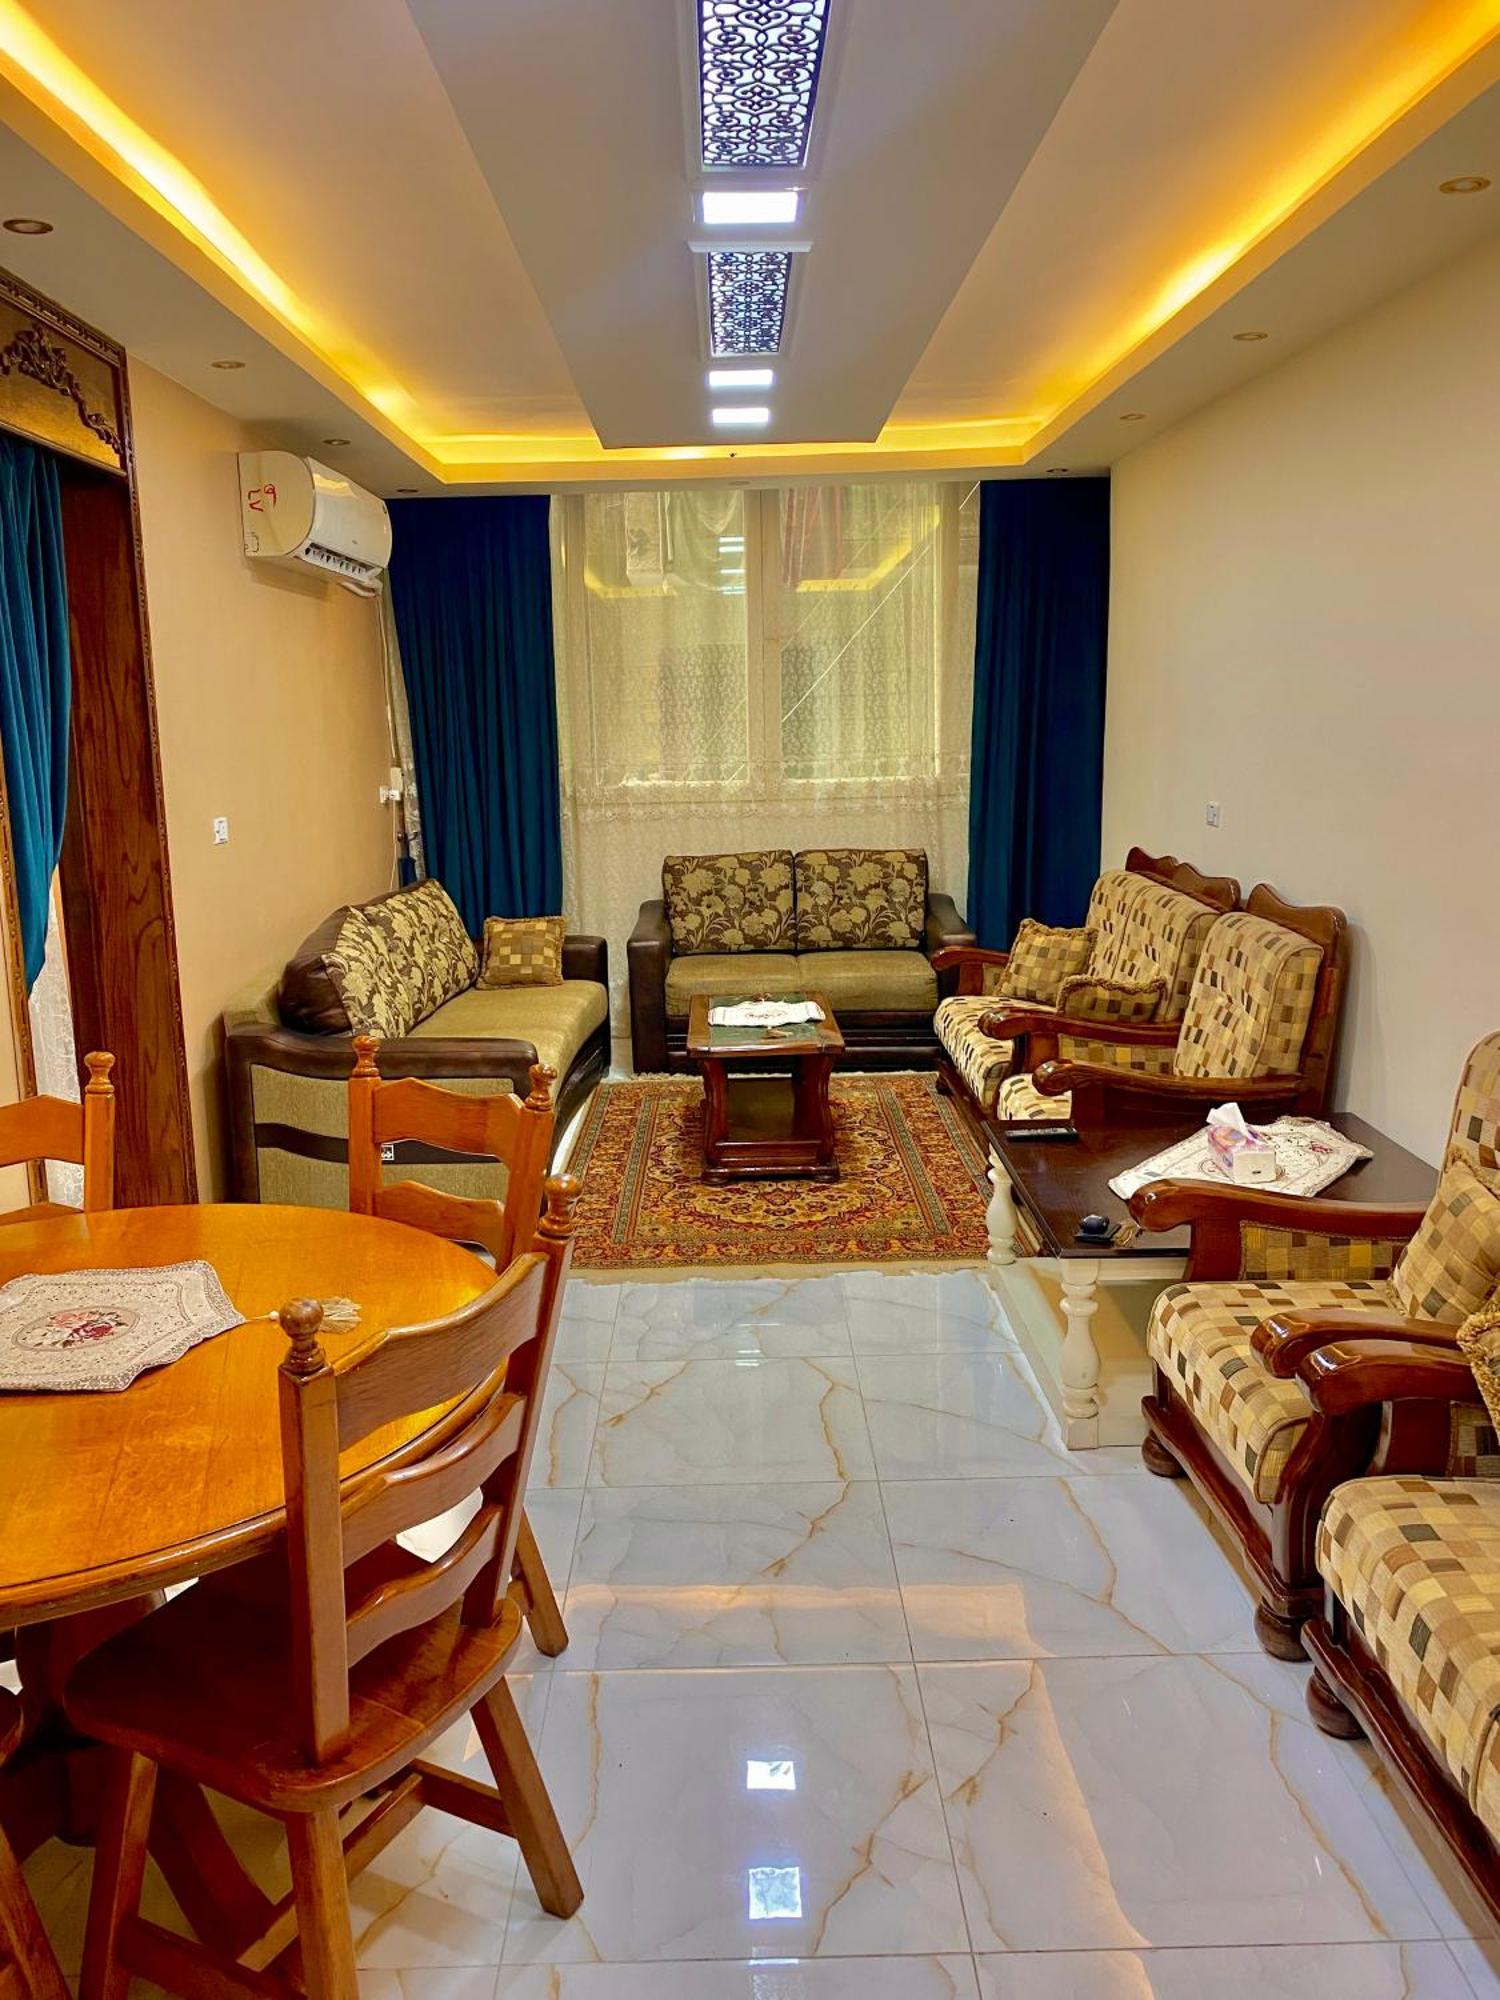 Comfort Sea View Serviced Apartment Near Montaza Palace And Easy Access To All Sites E Ac ,Wifi, Security 亚历山大港 外观 照片